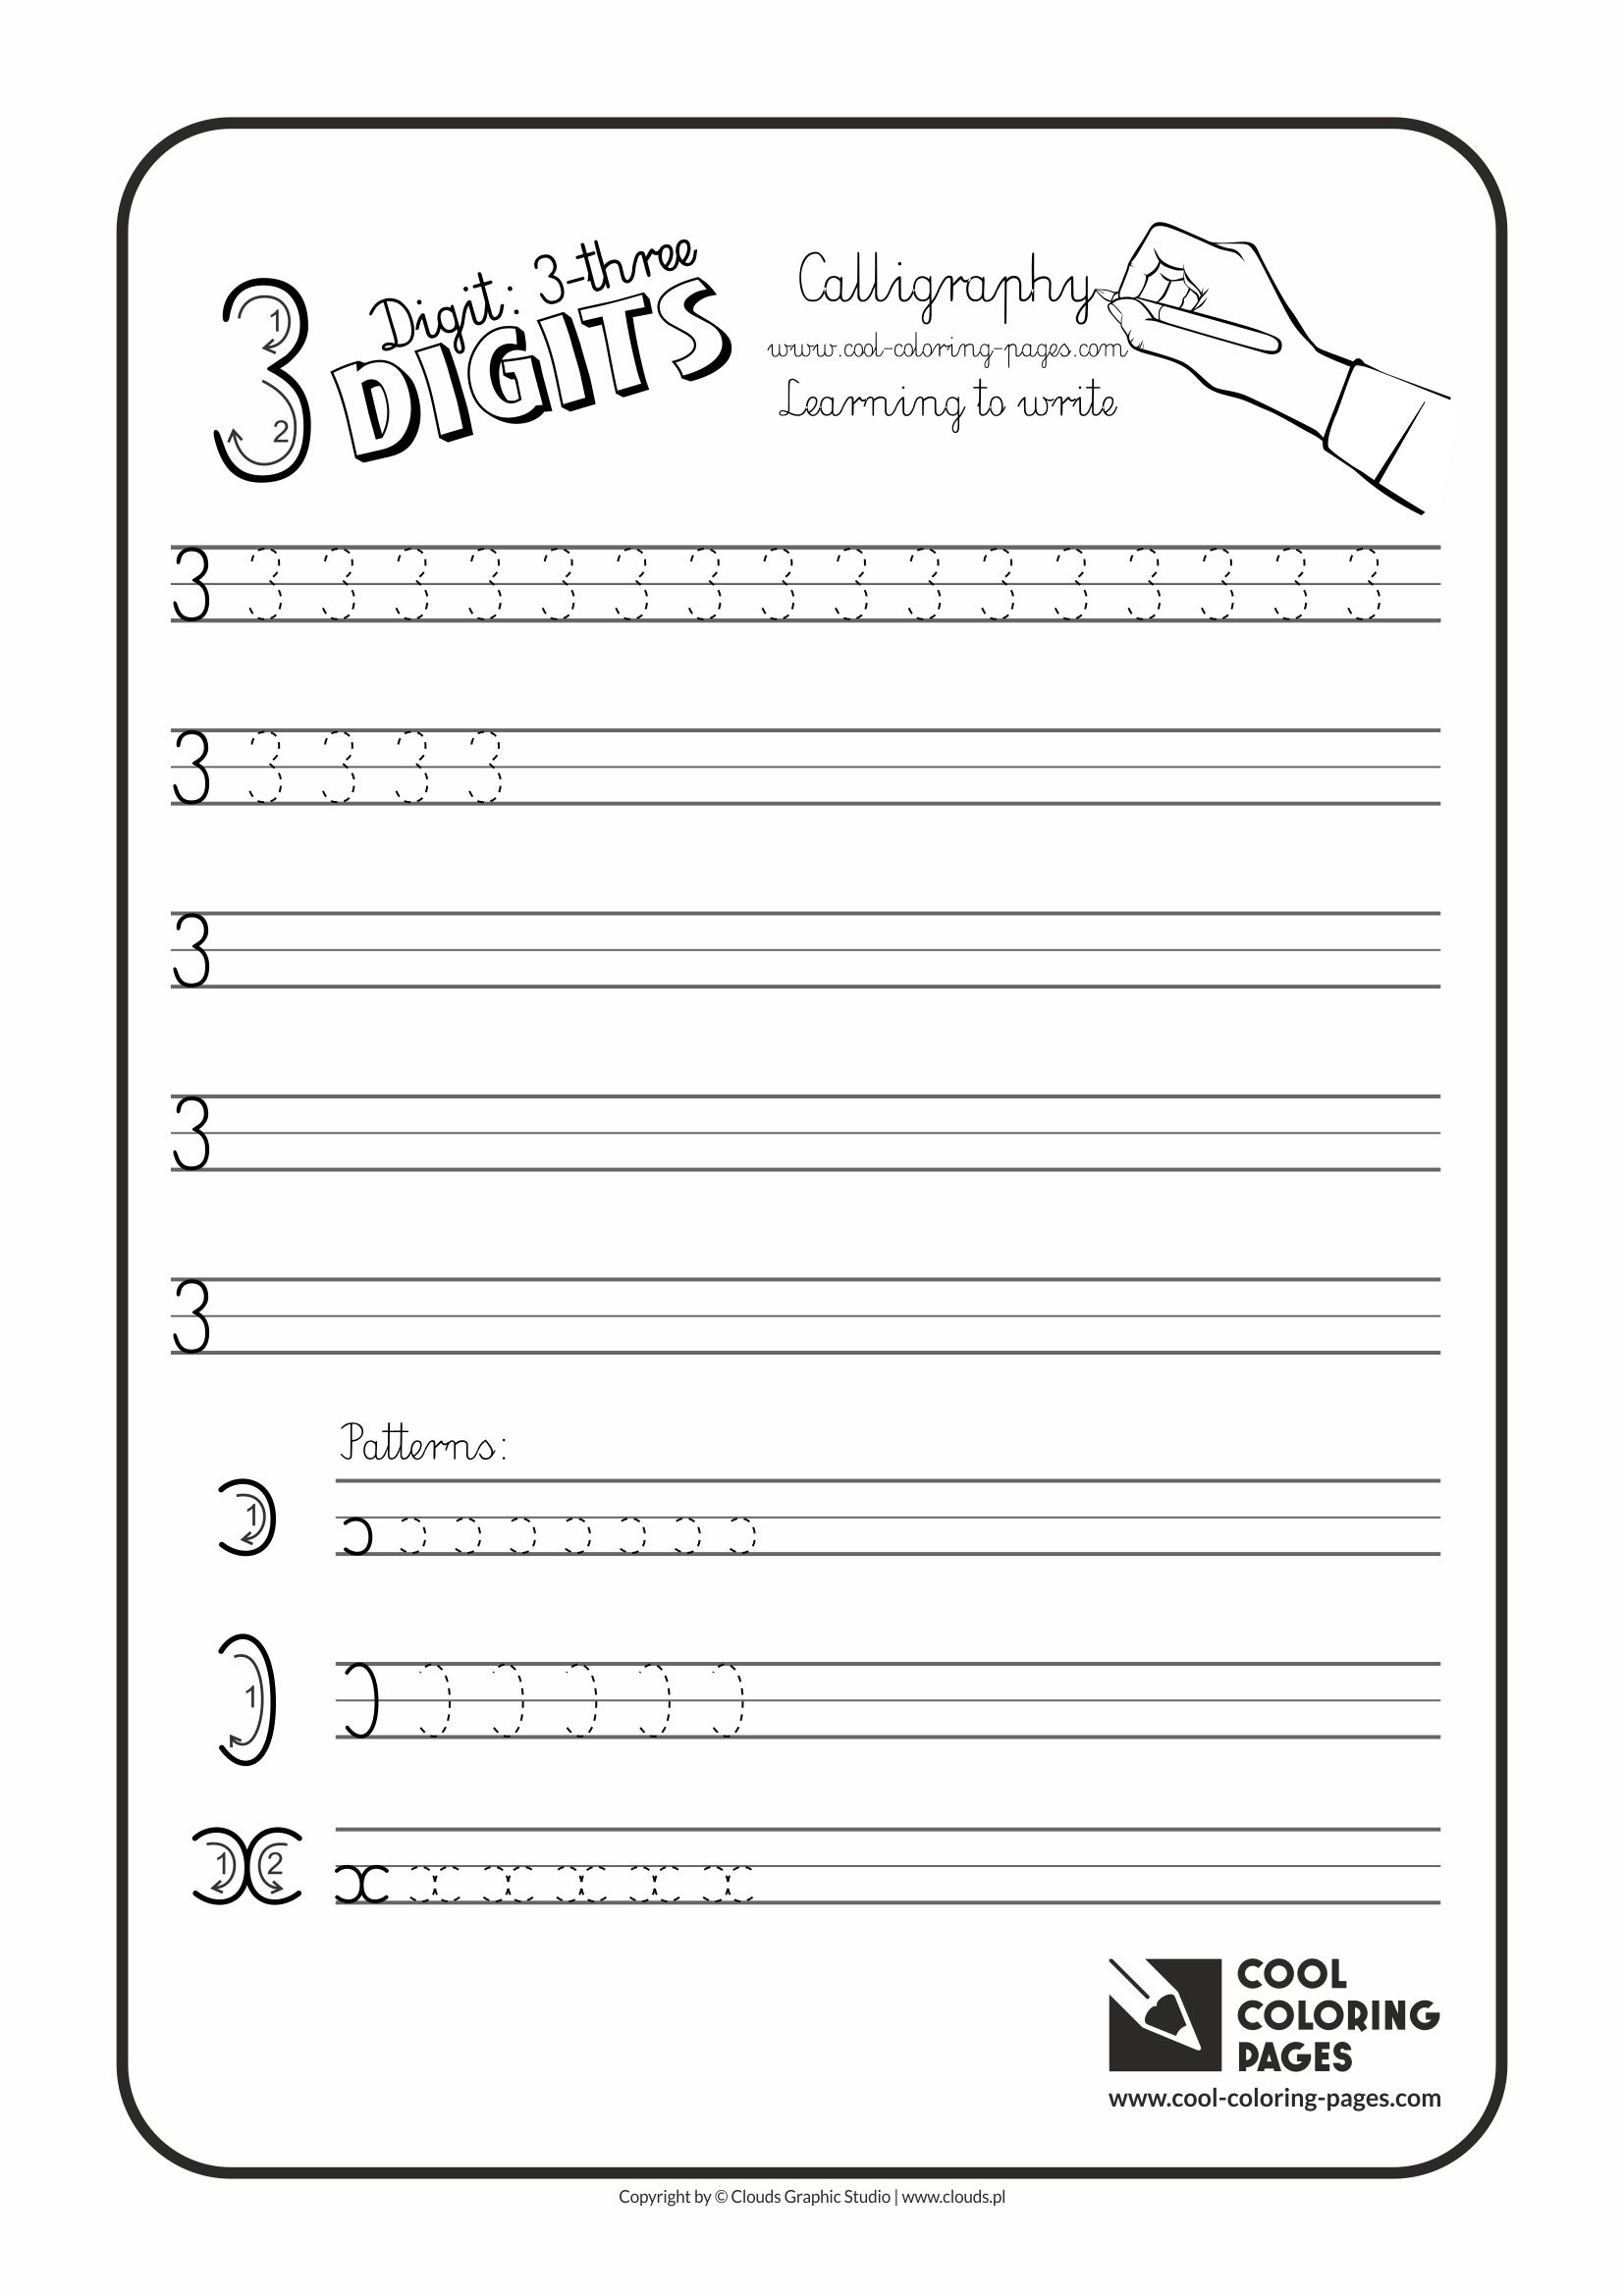 Cool Coloring Pages / Calligraphy / Digit 3 / Handwriting for kids